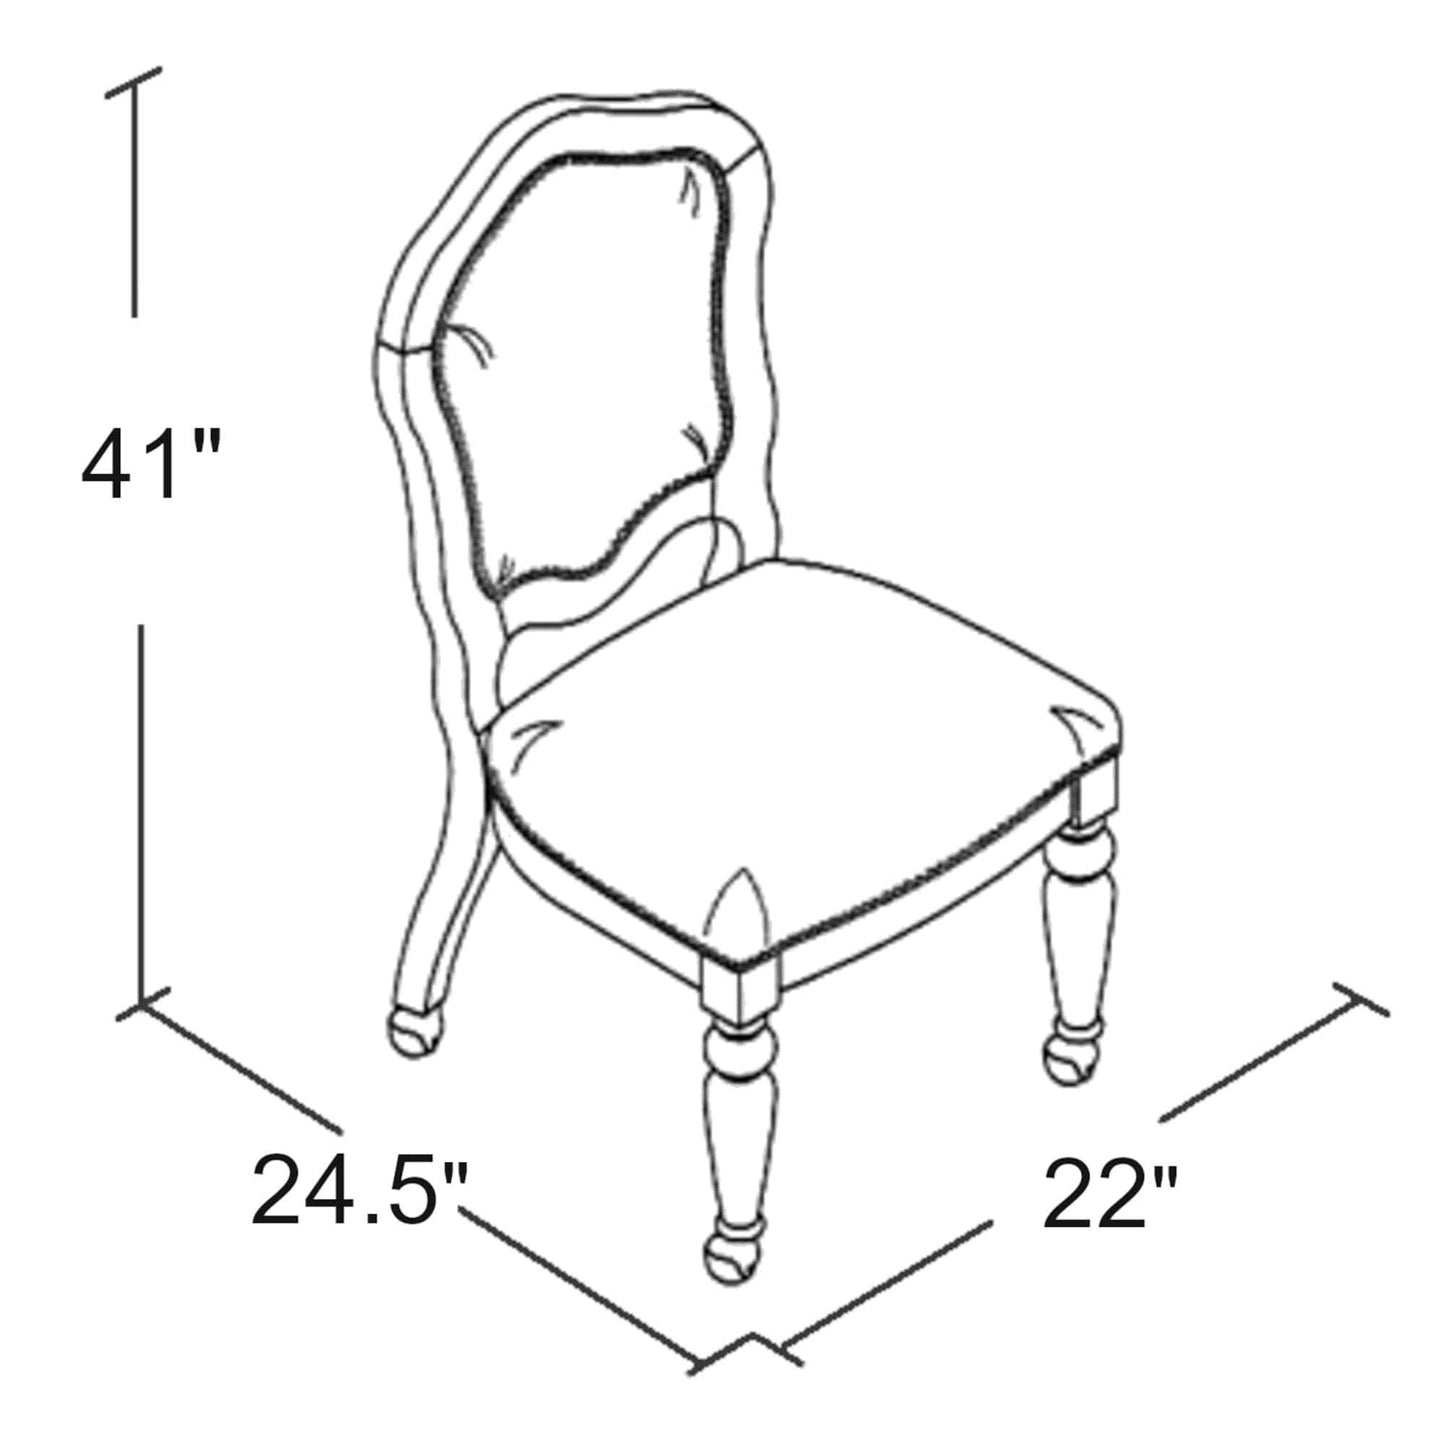 Dimensions of chair